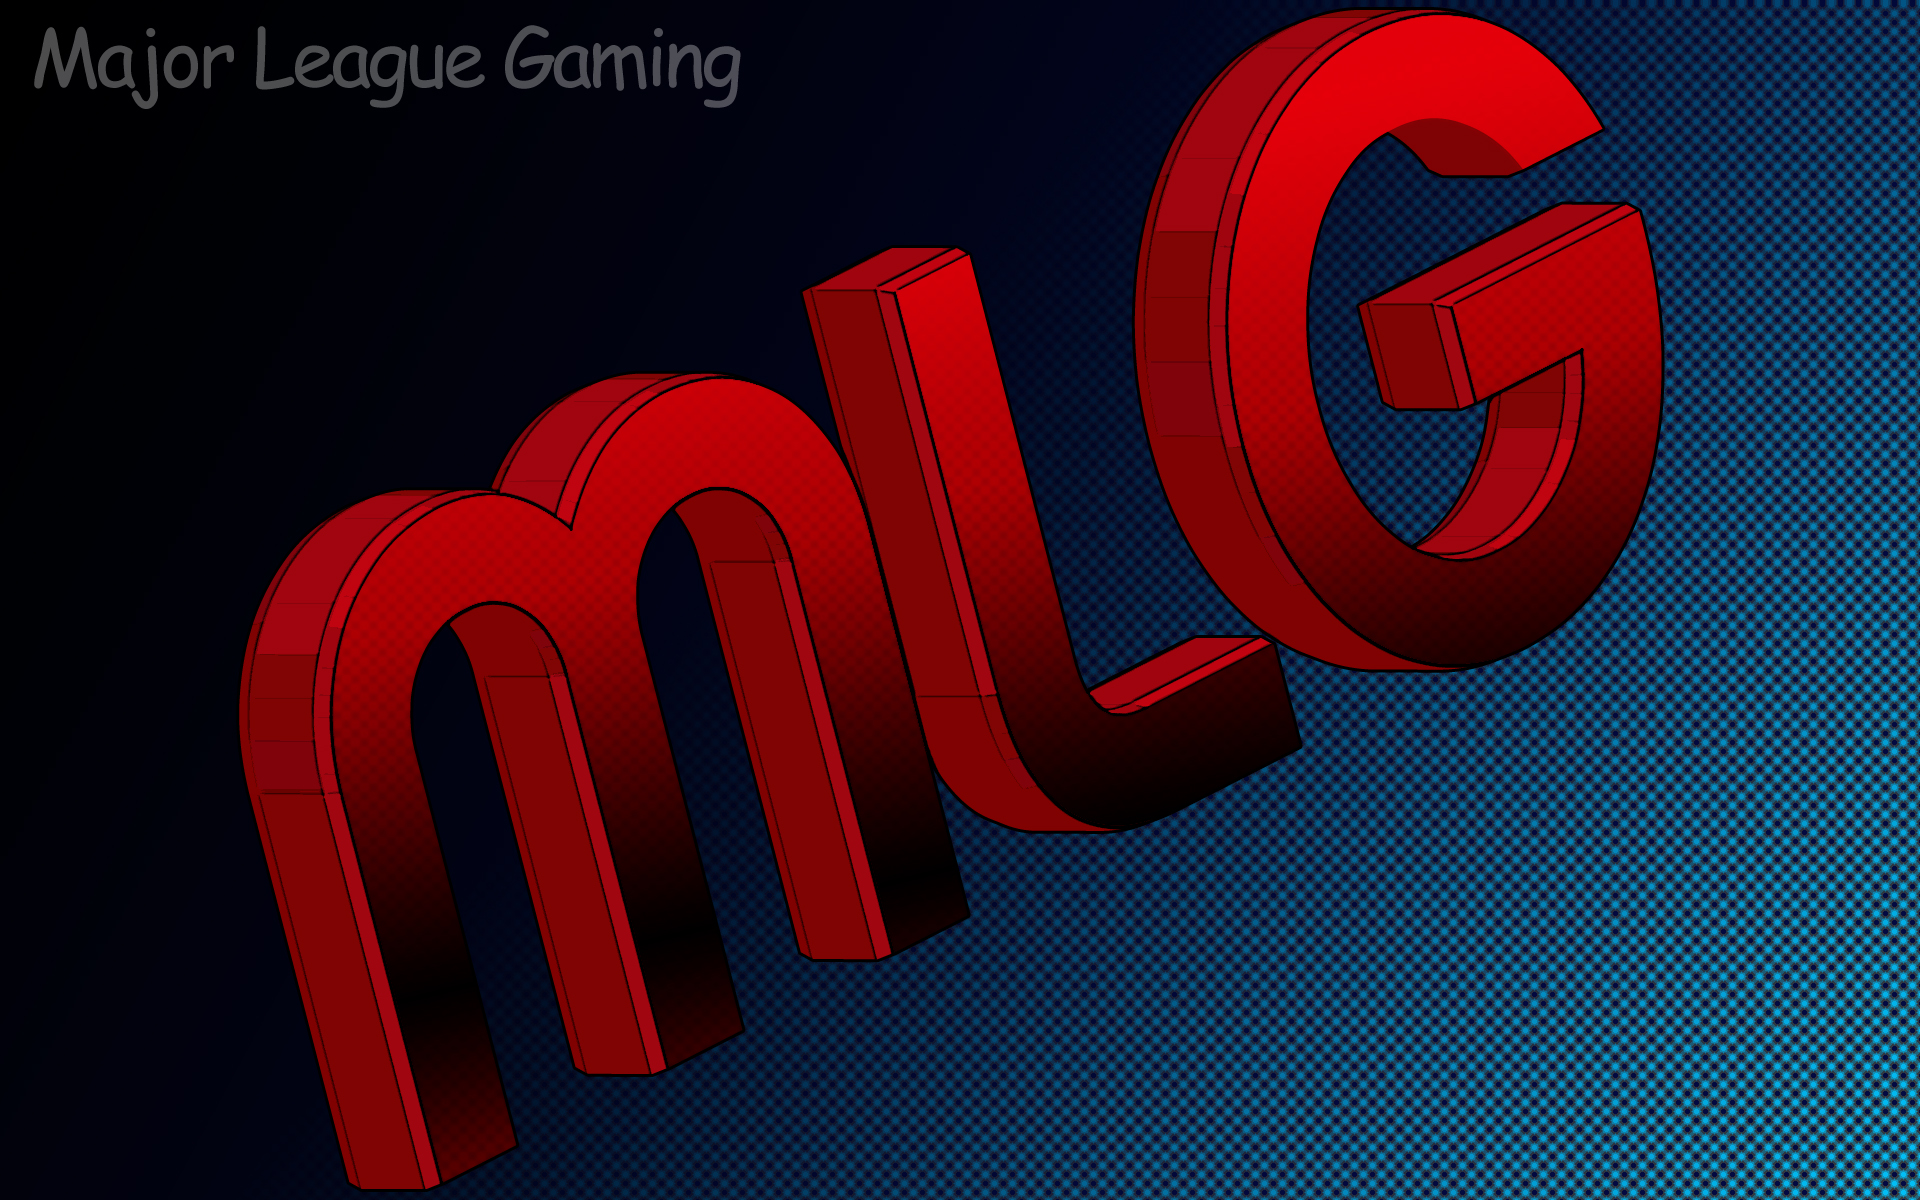 Mlg Carbon Wallpaper By Creynolds25